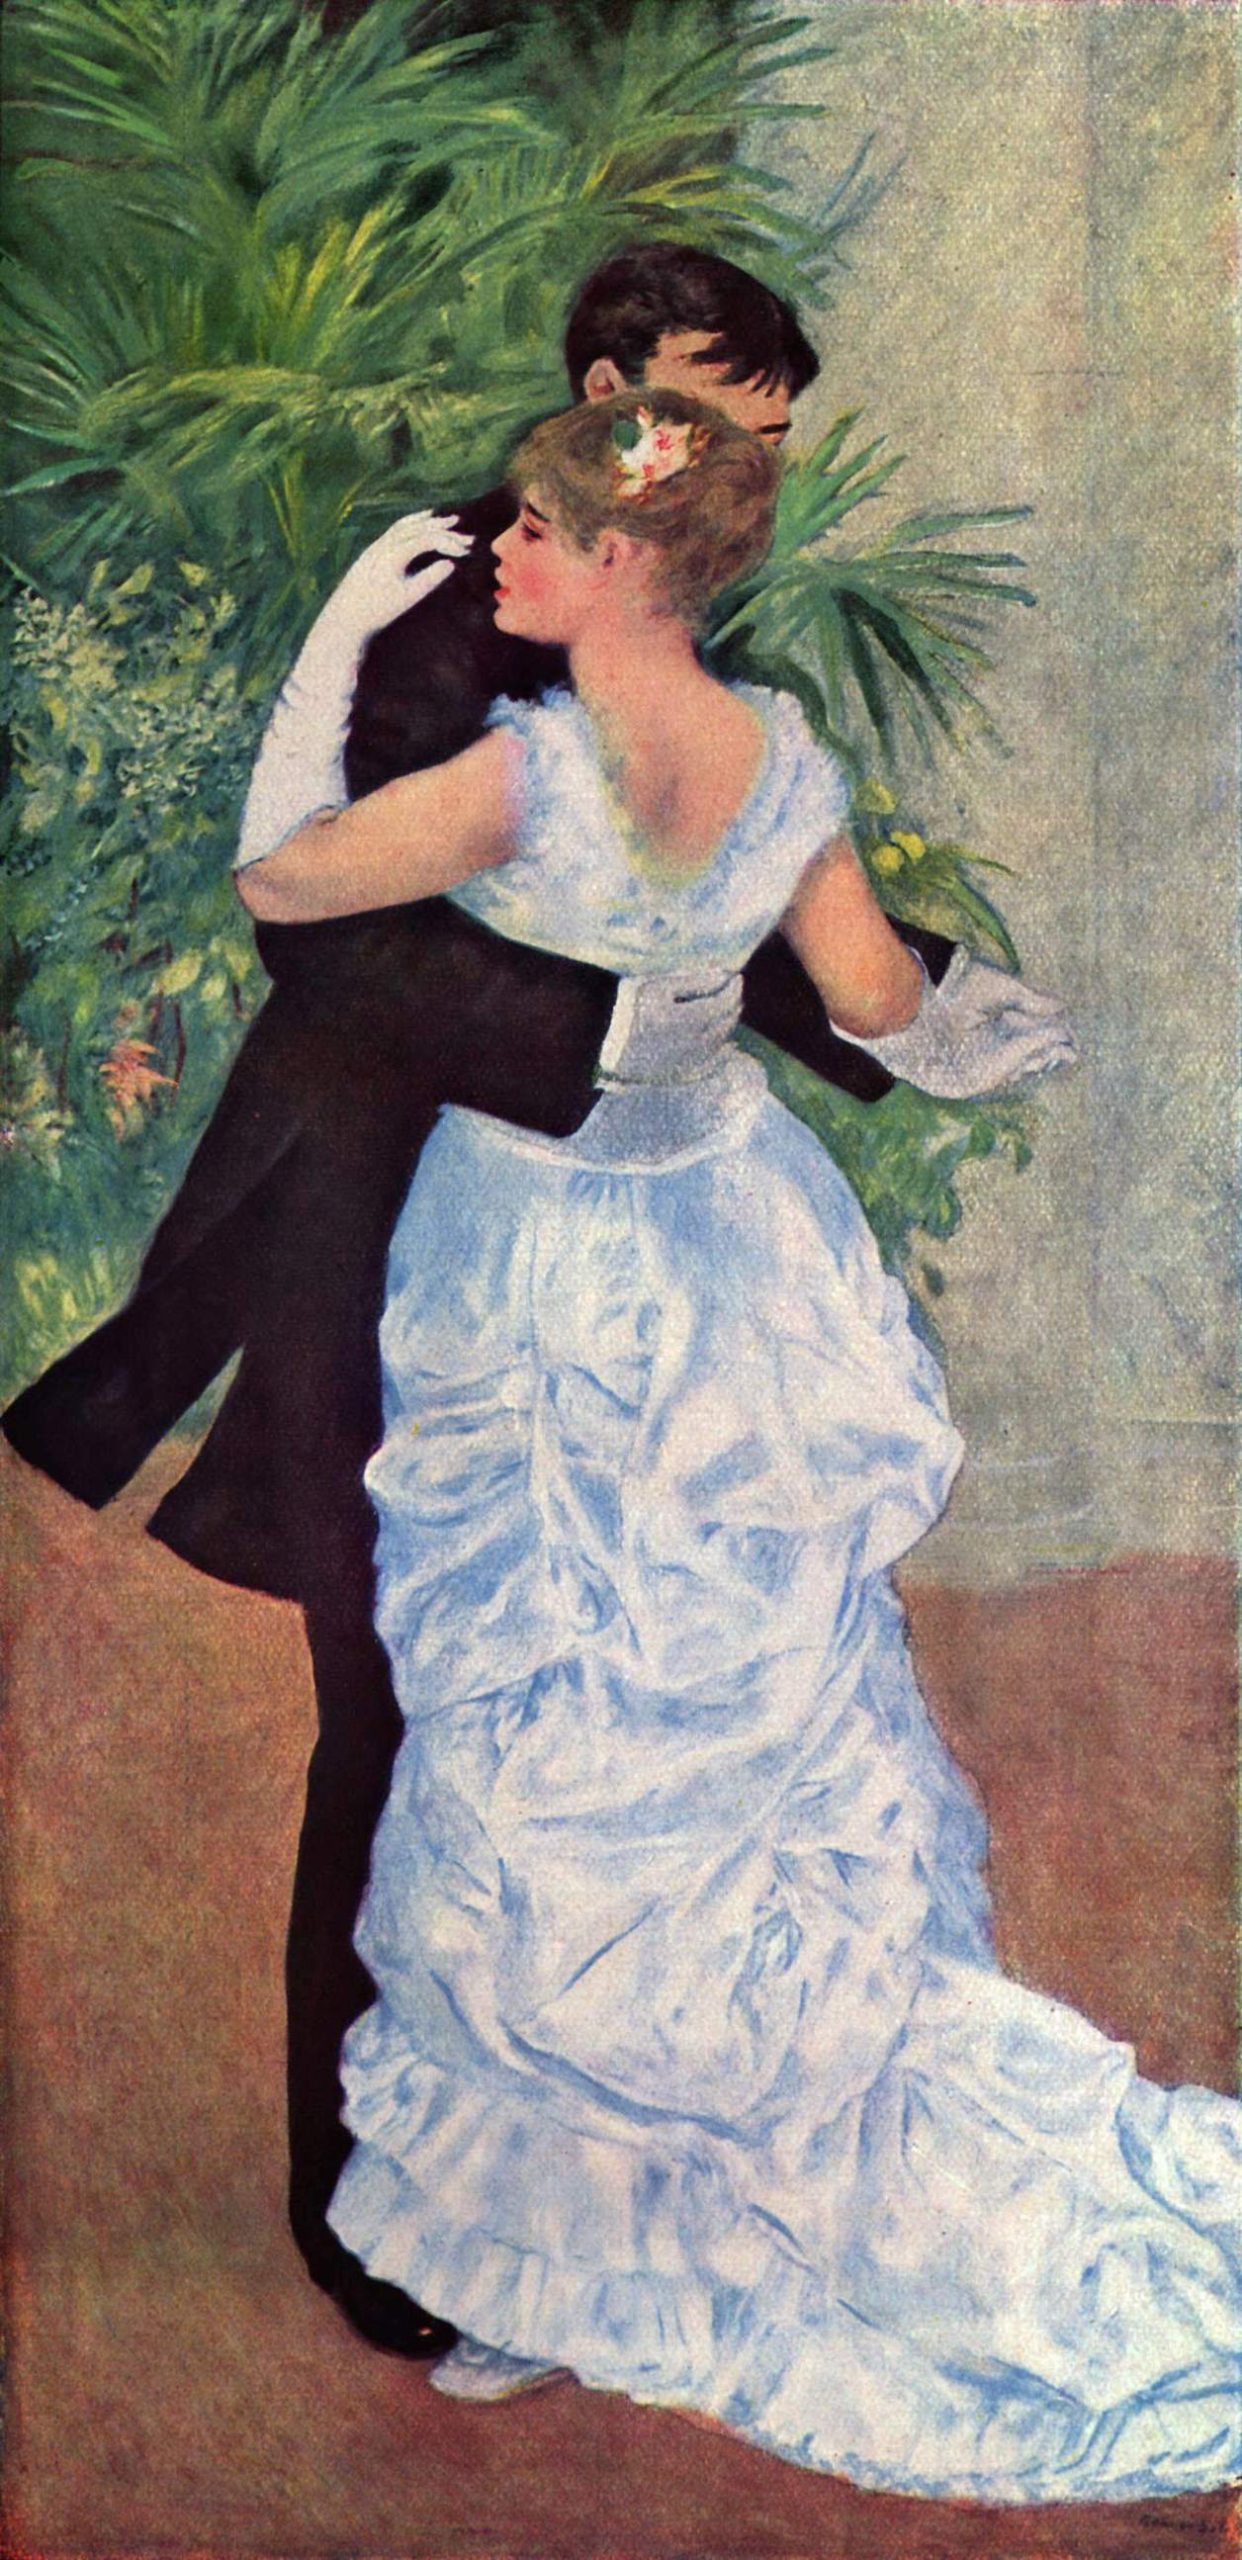 A man and woman in formal attire dancing hand-in-hand